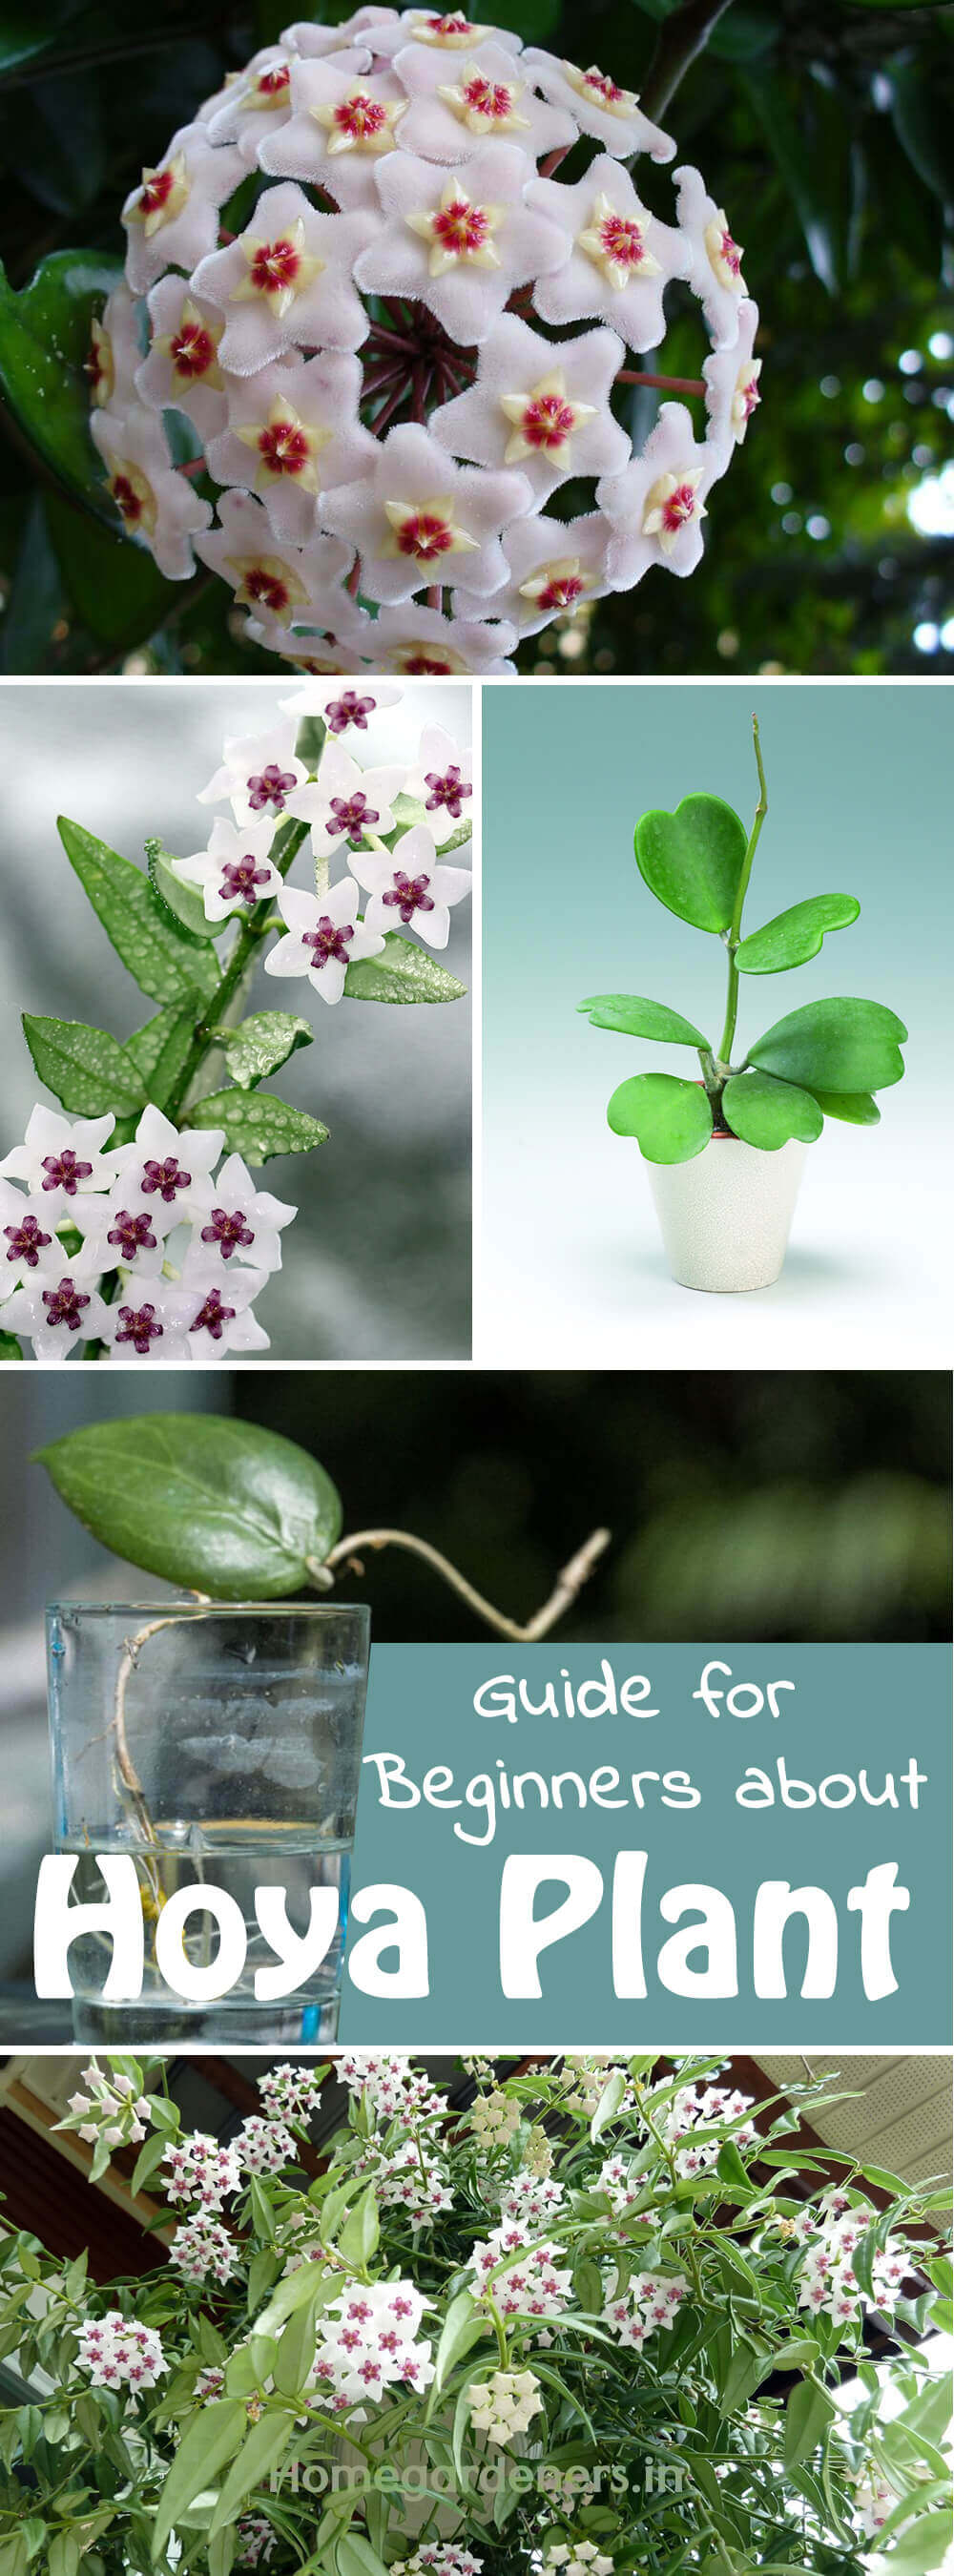 The Complete Guide for Beginners about Hoya plant